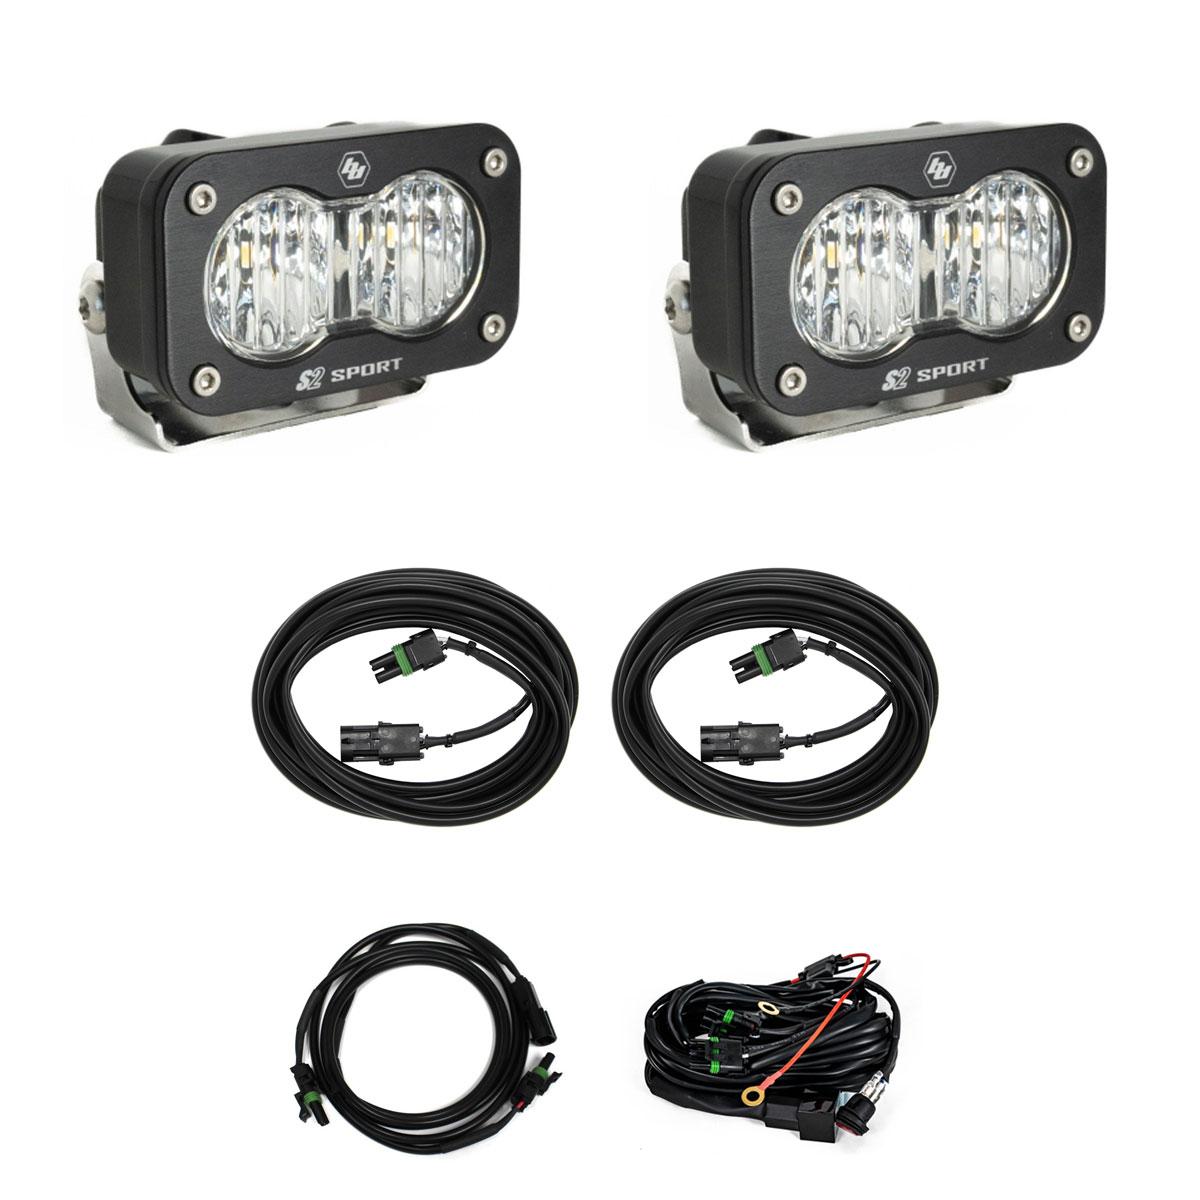 Ford S2 Sport Dual Reverse Light Kit - Ford 2023-On F-250/350 Super Duty